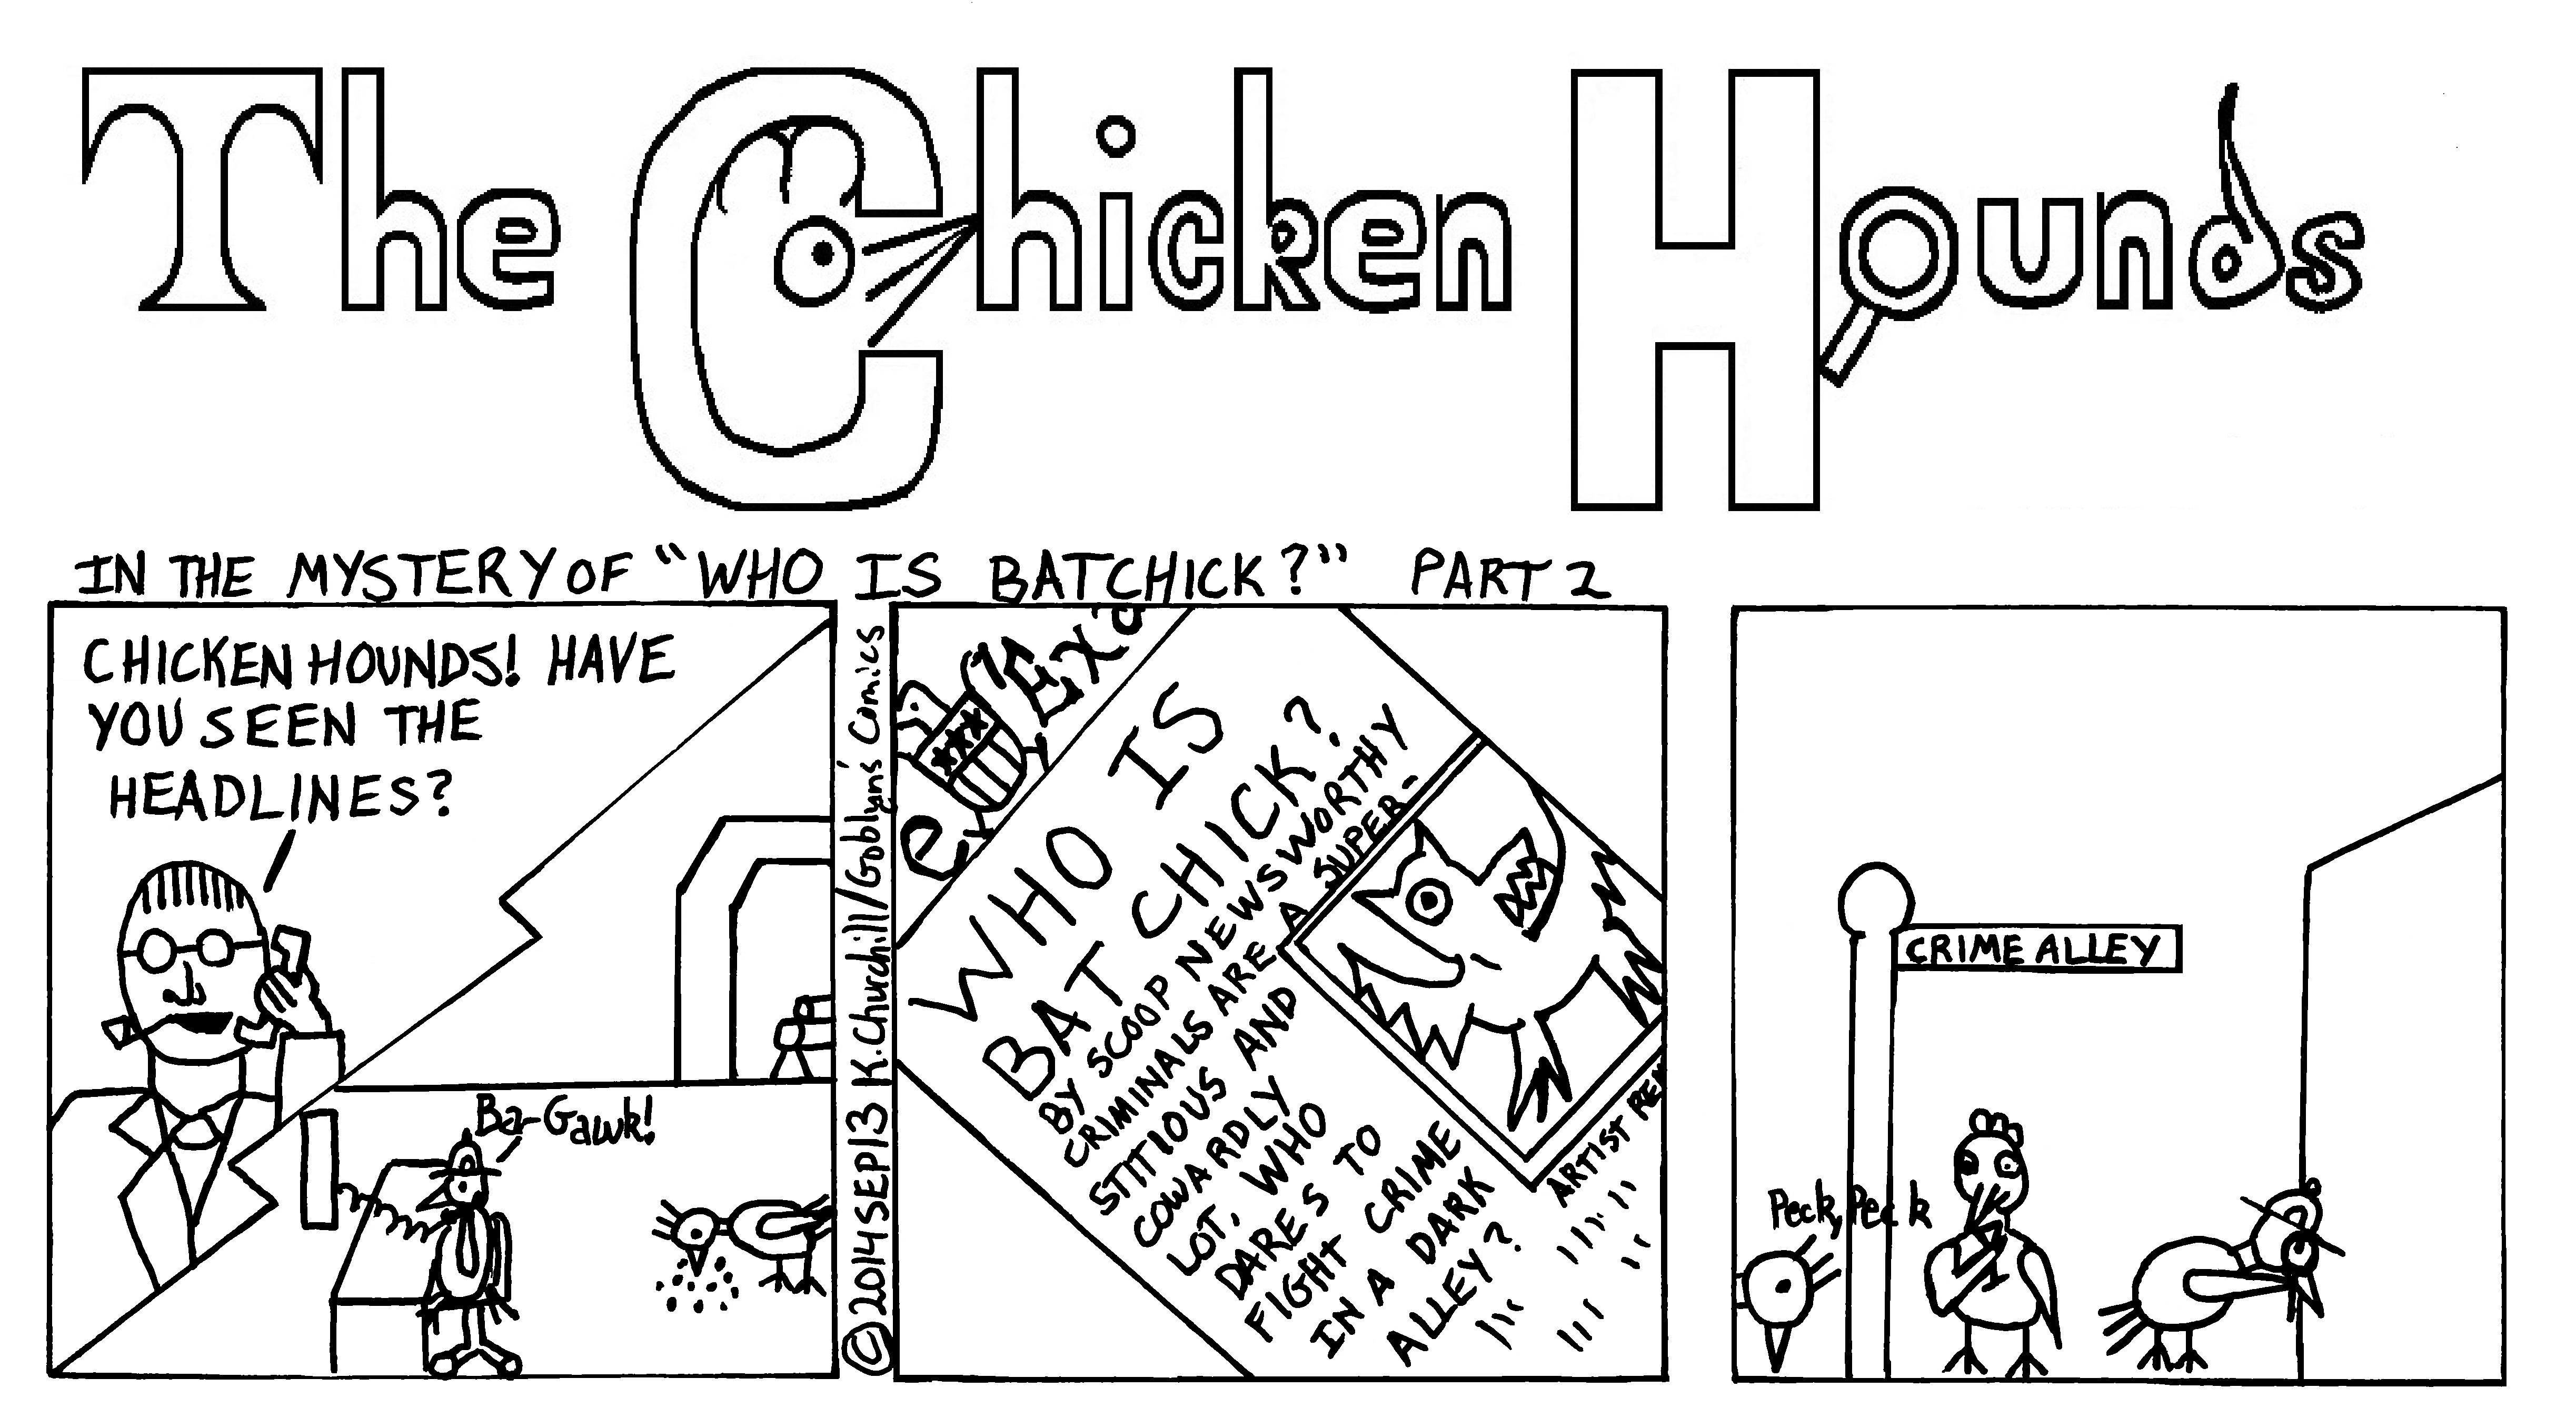 The Chicken Hounds in the Mystery of "Who is Batchick?"